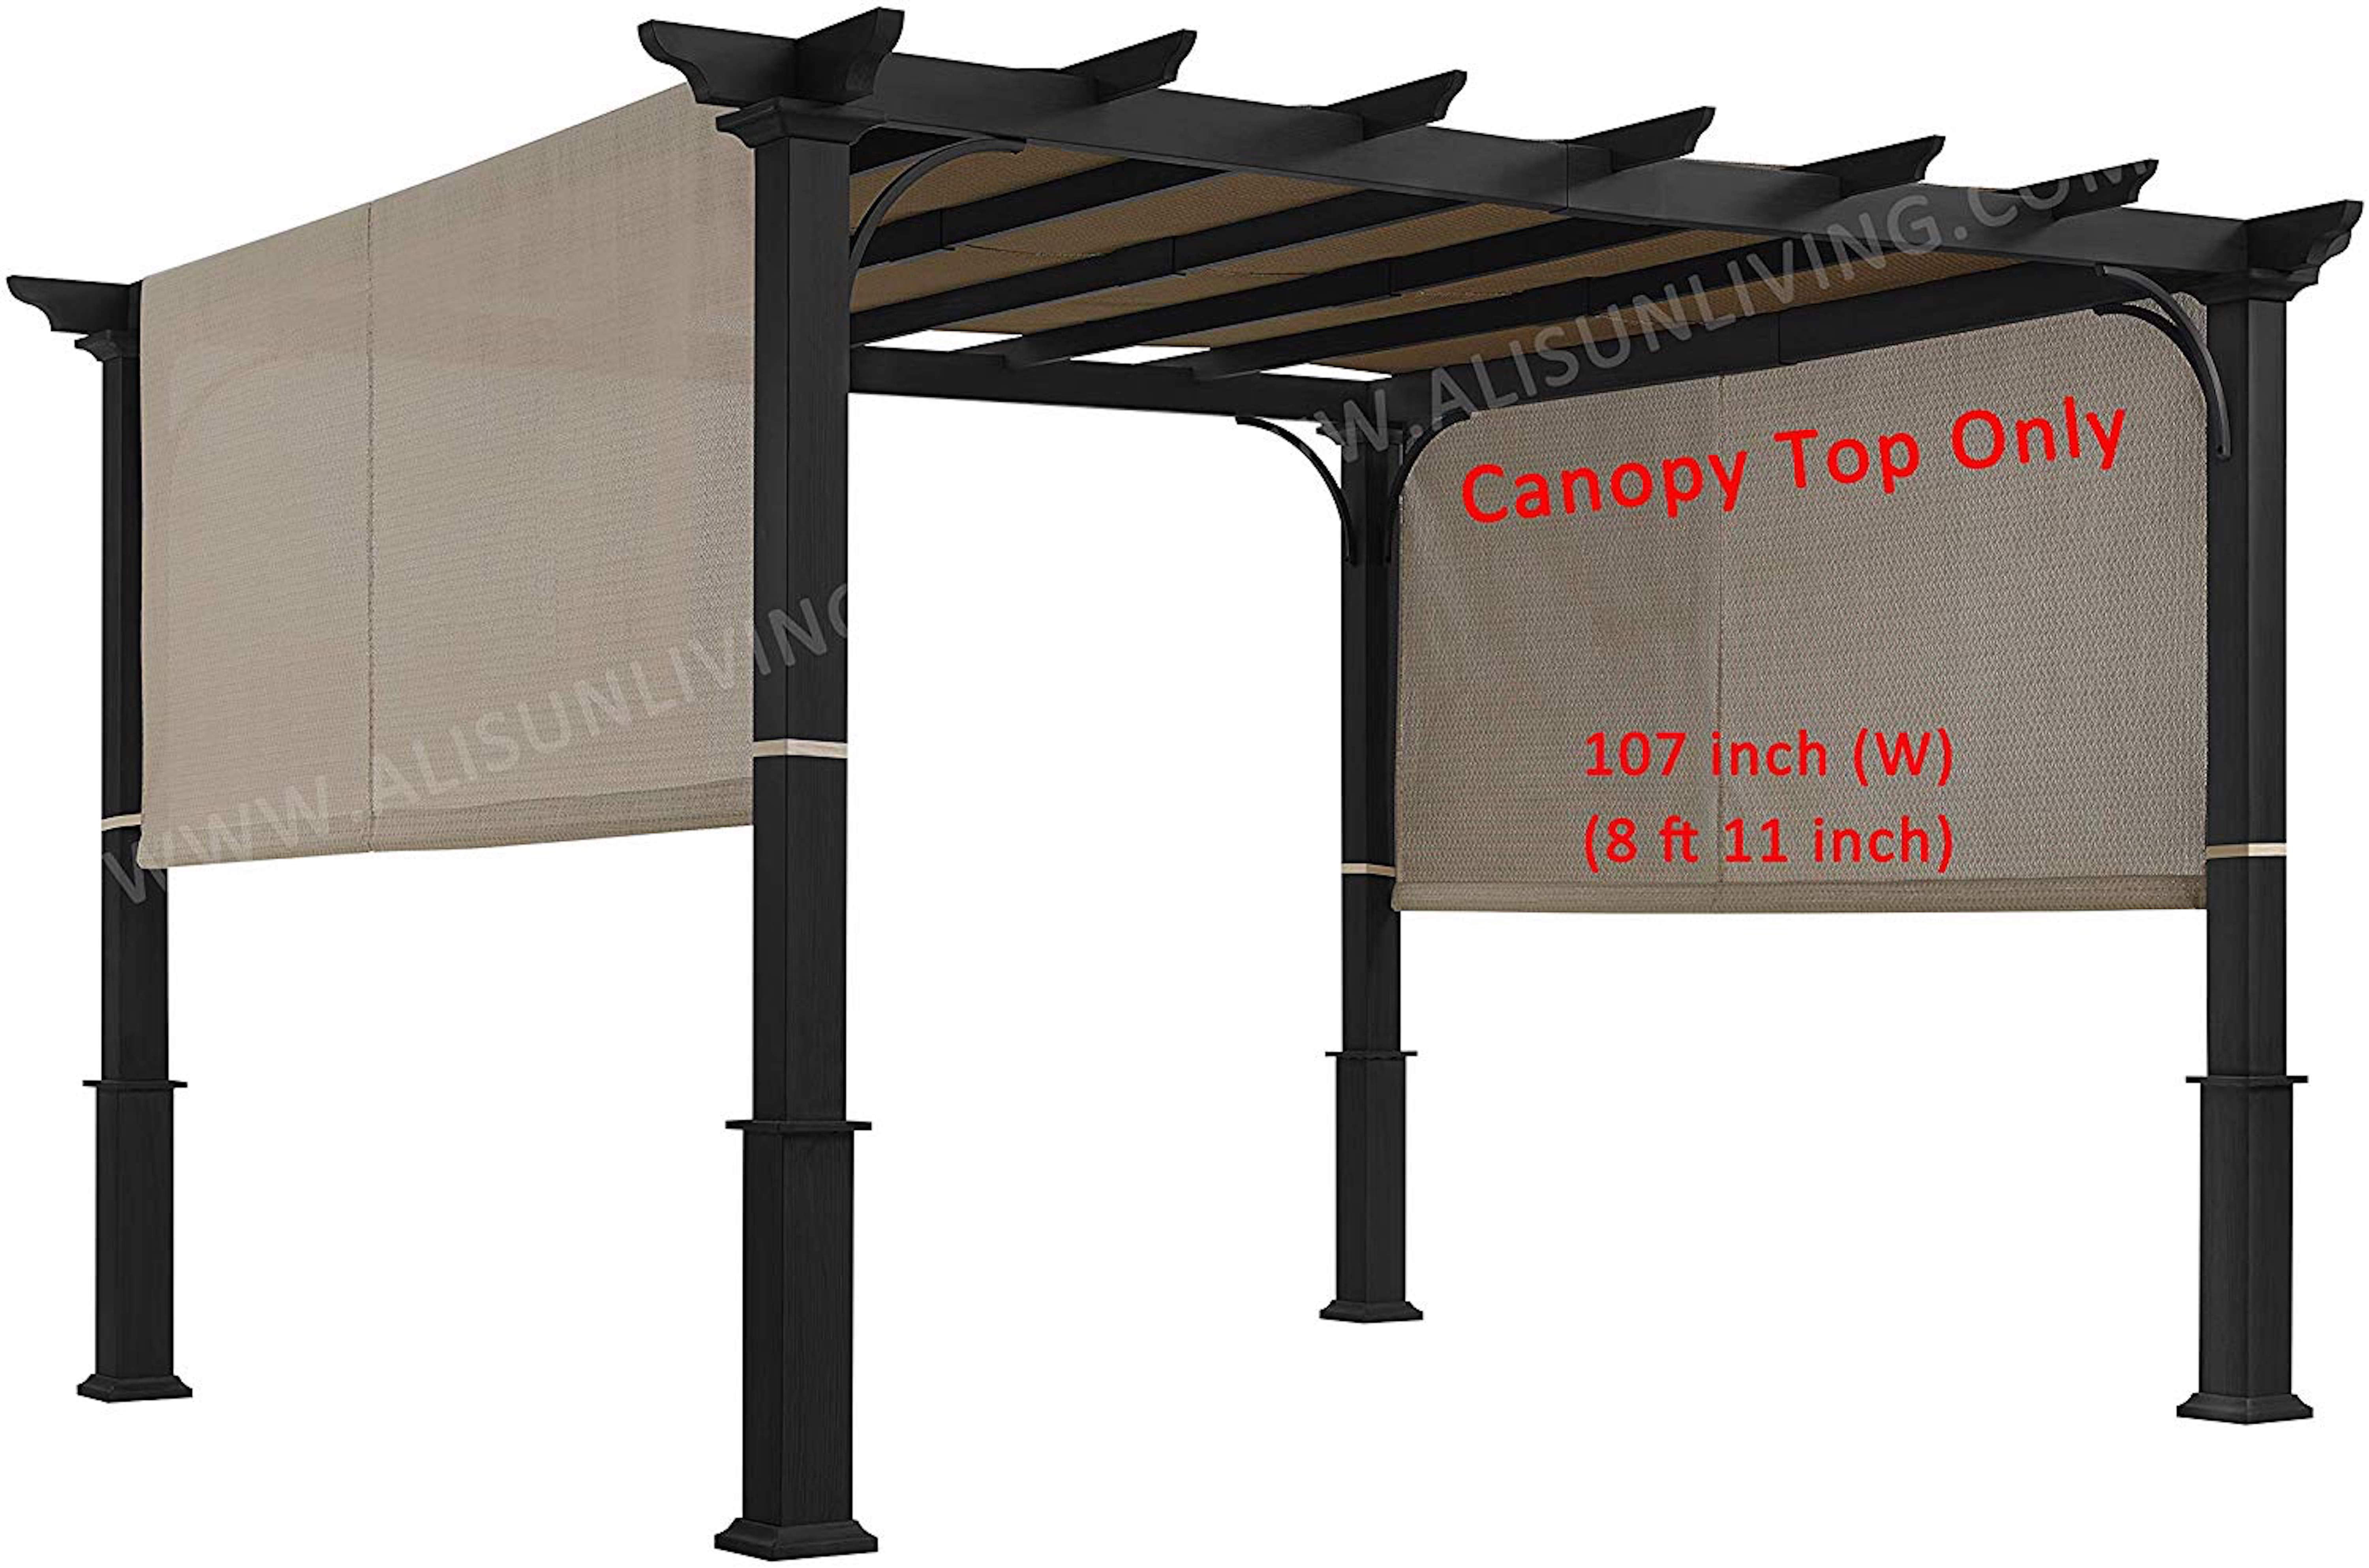 Sling Canopy (with Ties) for The Lowe's Garden Treasures 10 Ft. x 10 Ft